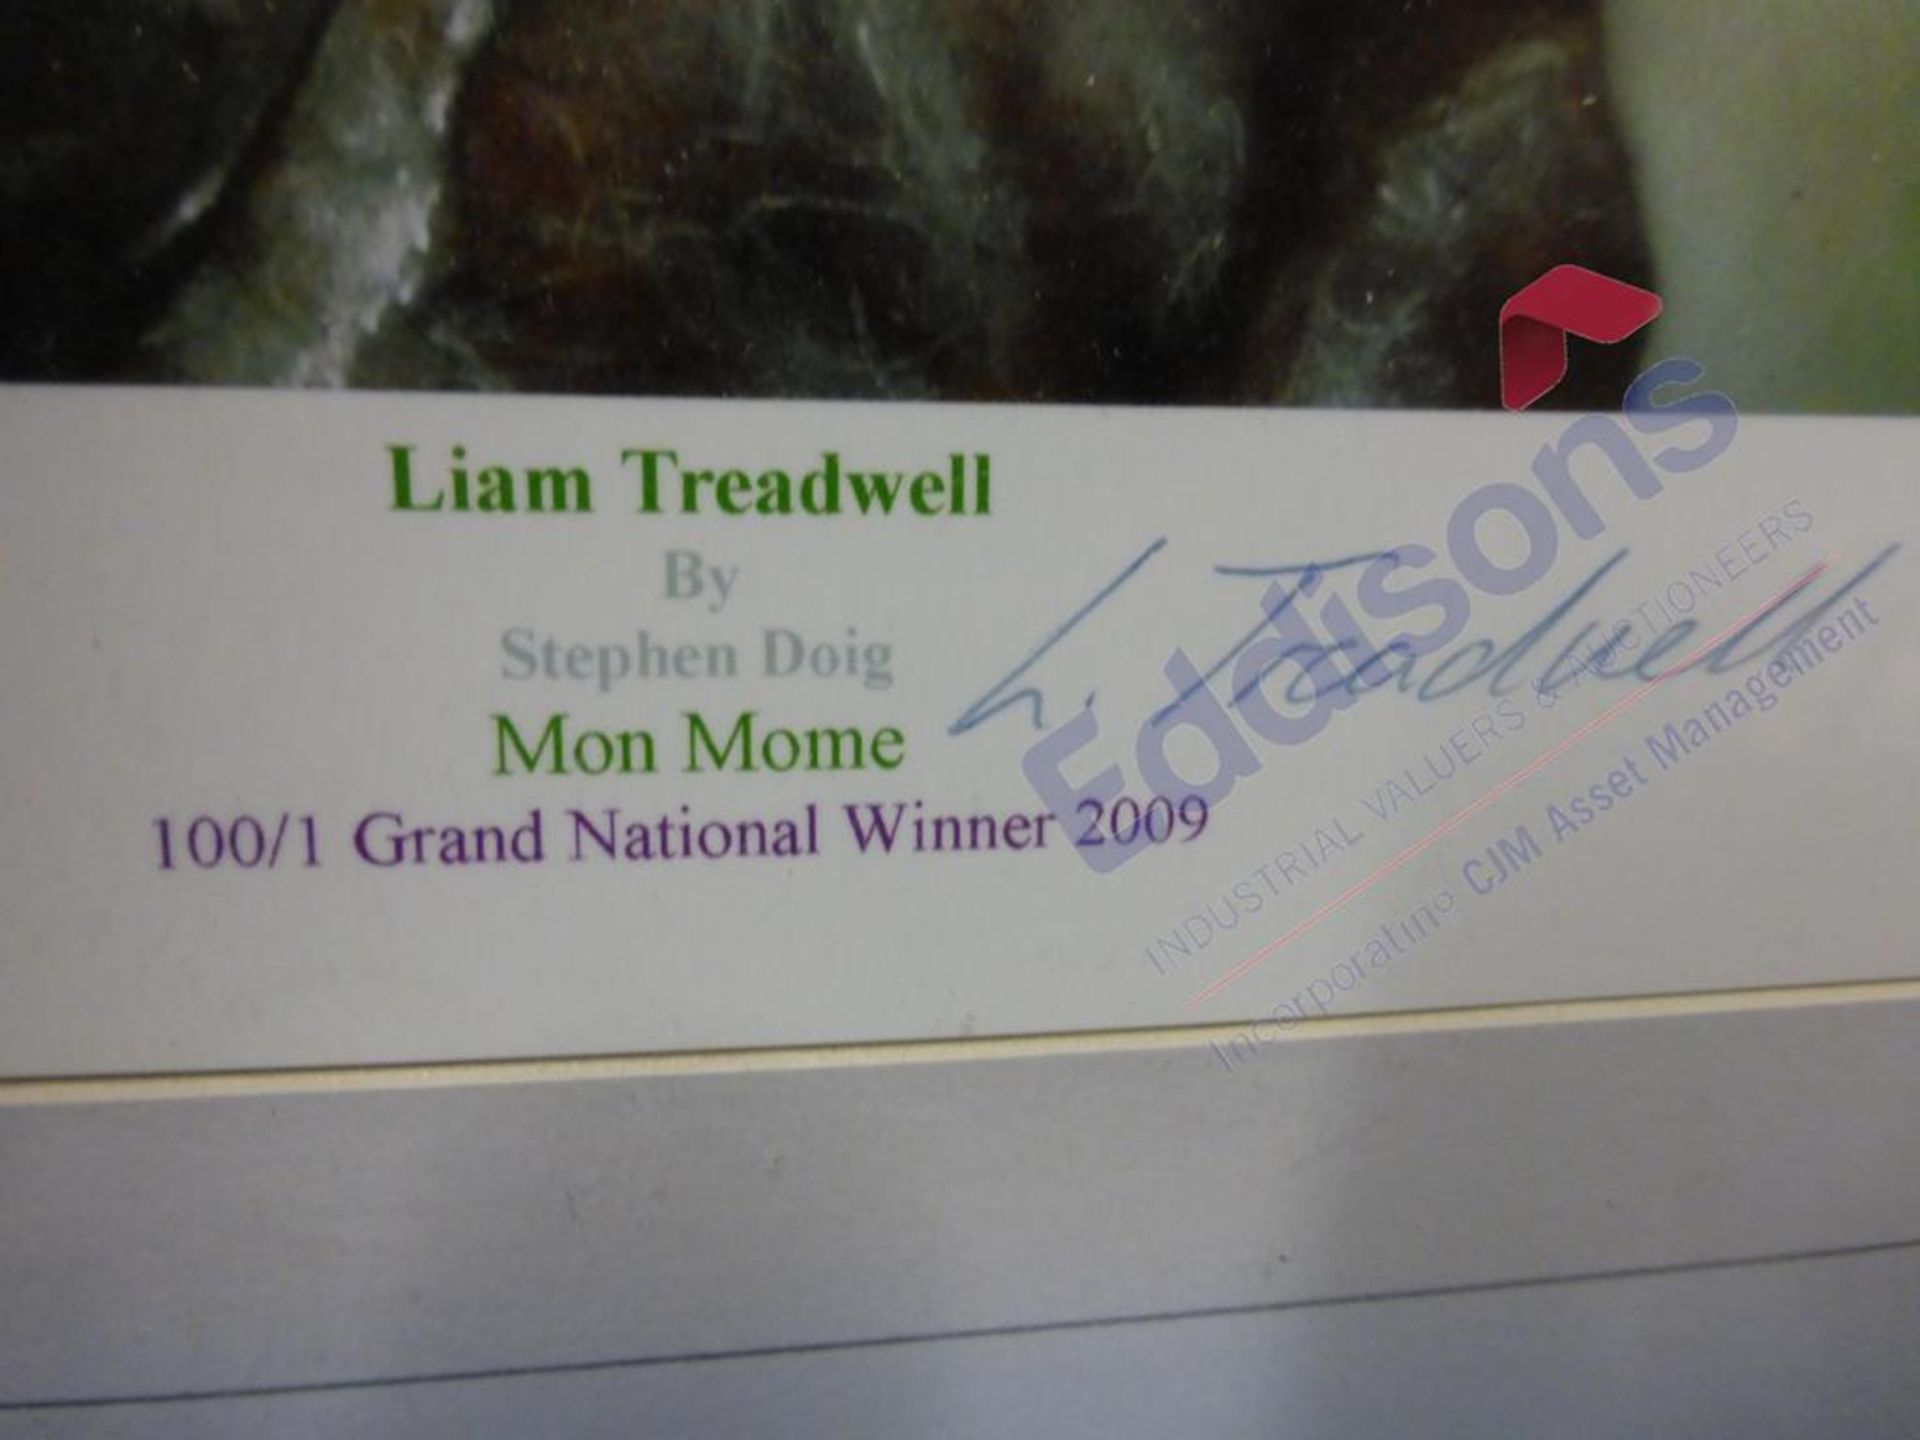 Sports Autographs: Liam Treadwell by Stephen Doig "Mon Mome" Grand National Winner 2009 - Image 3 of 5